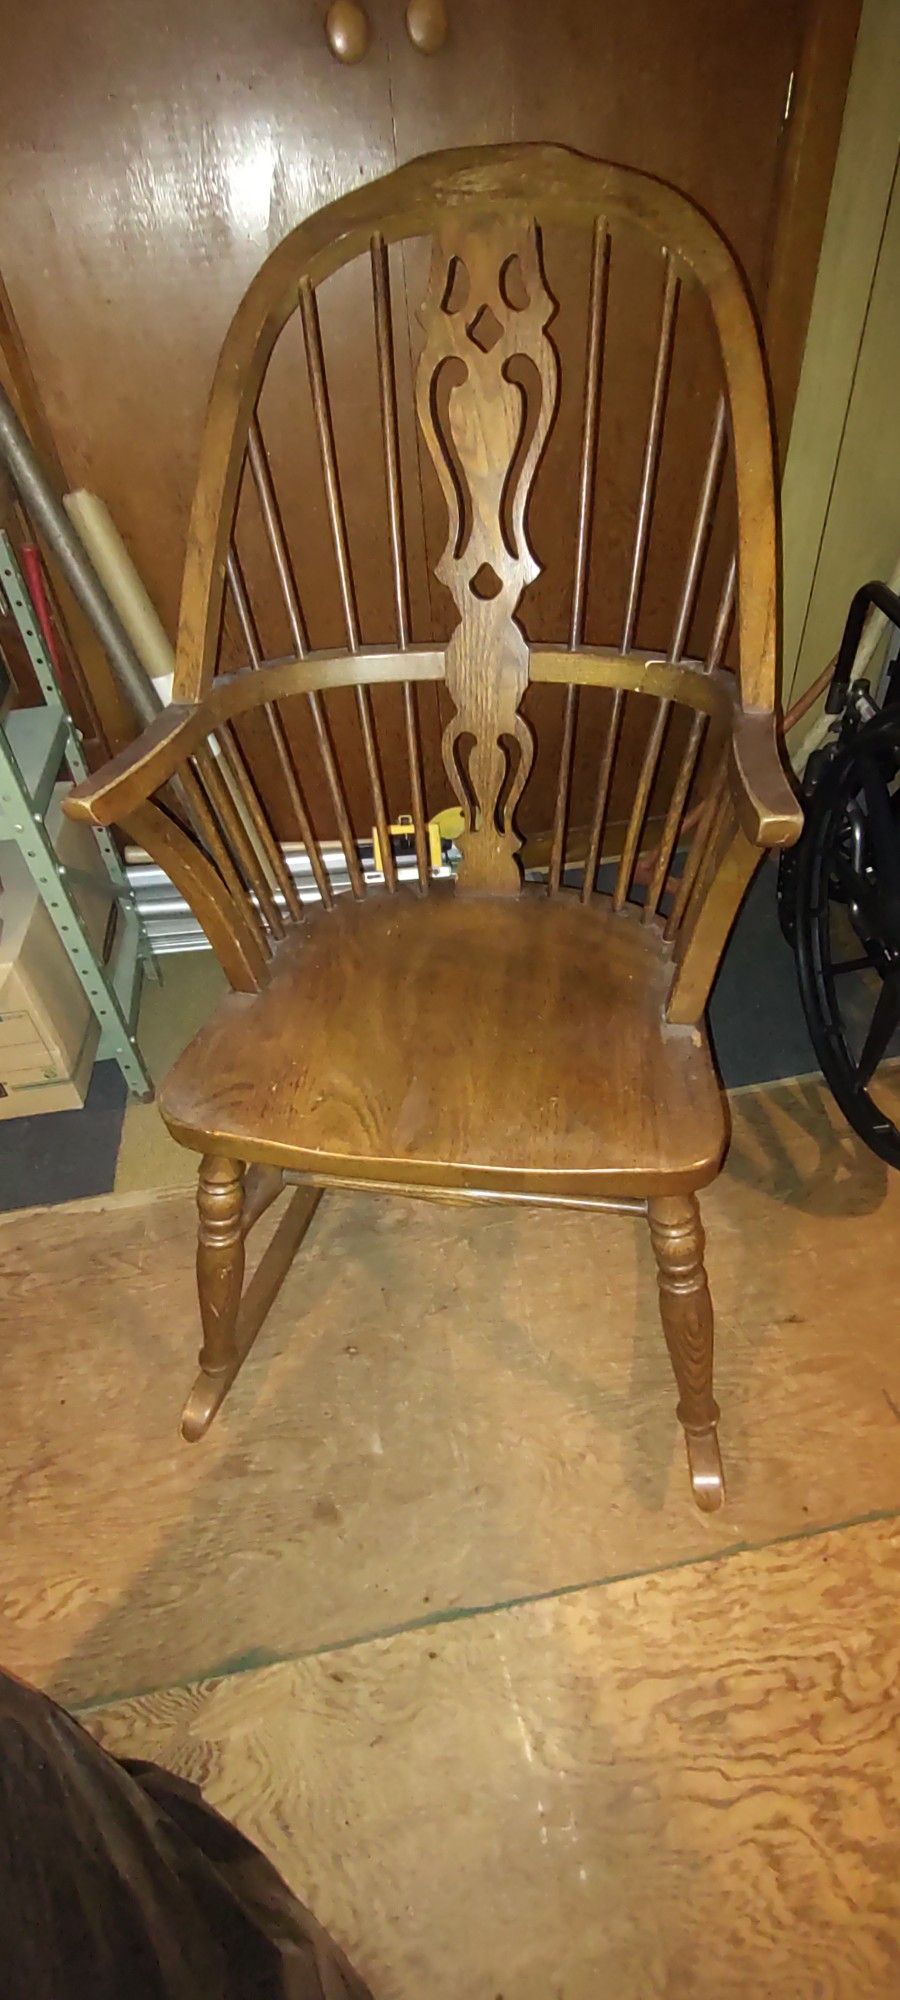 Vintage Rounded Rocking Chair 